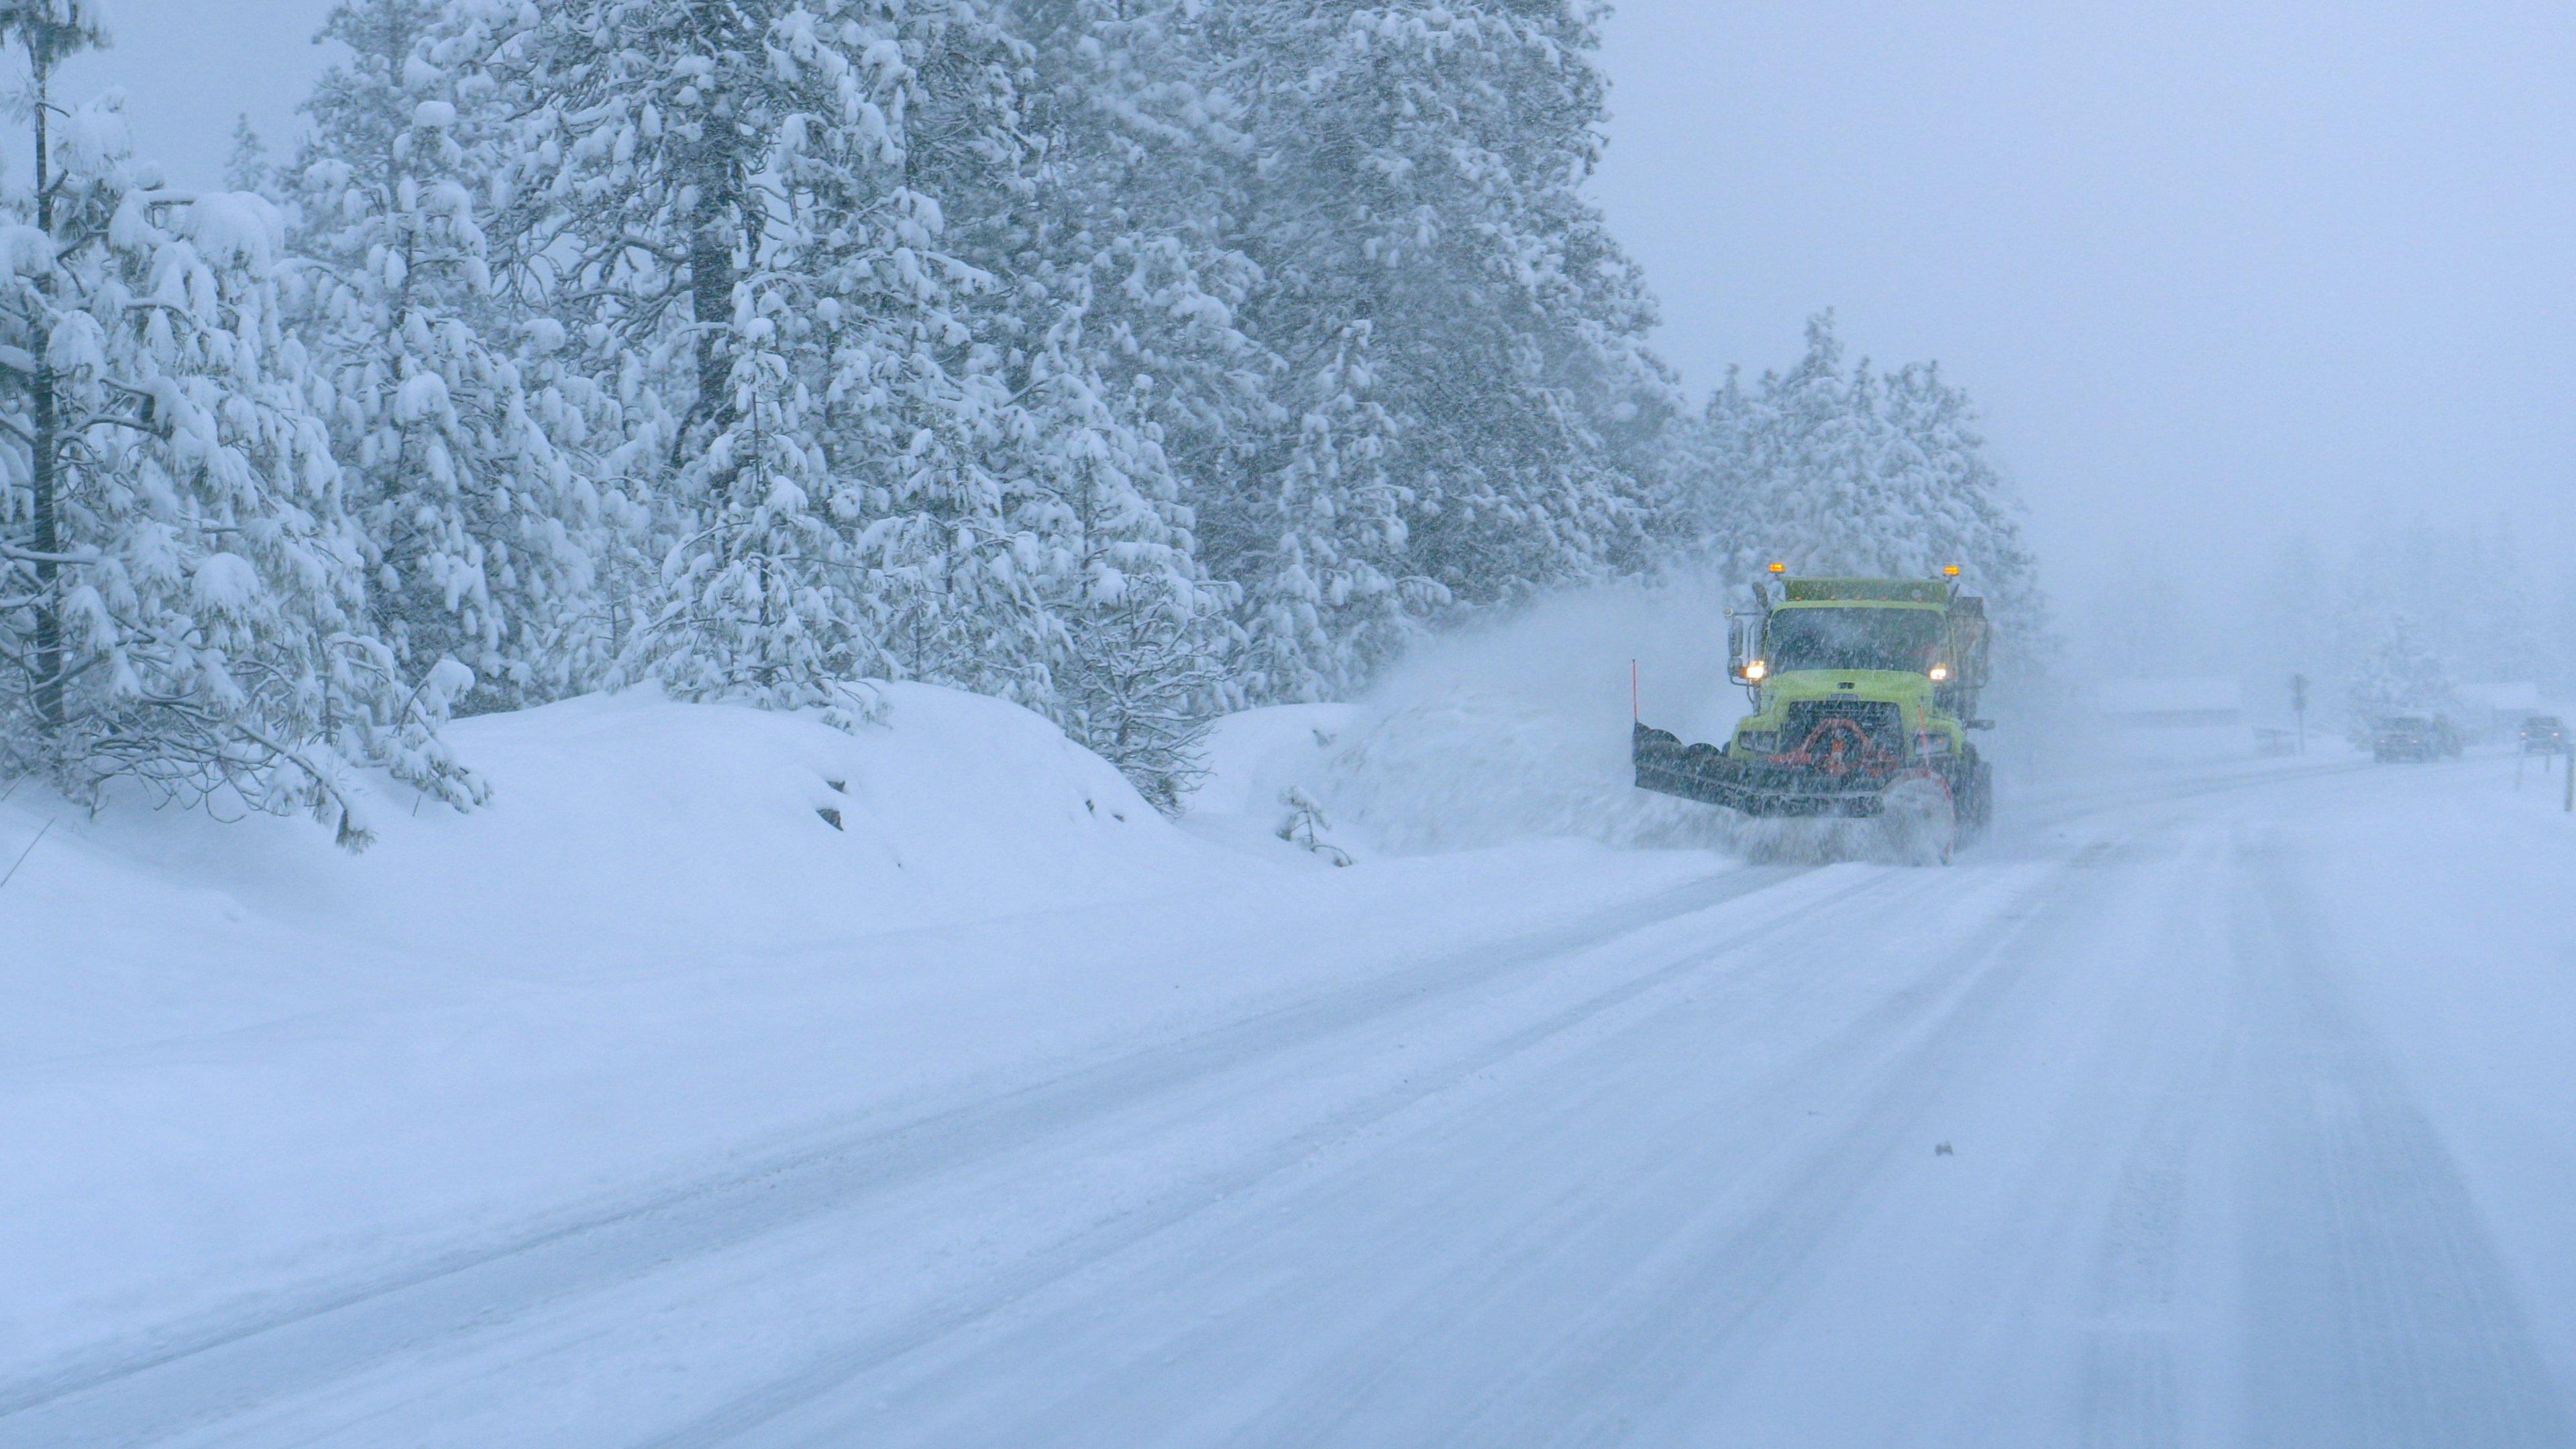 A snow plow cleans up a wintry road next to a forest.